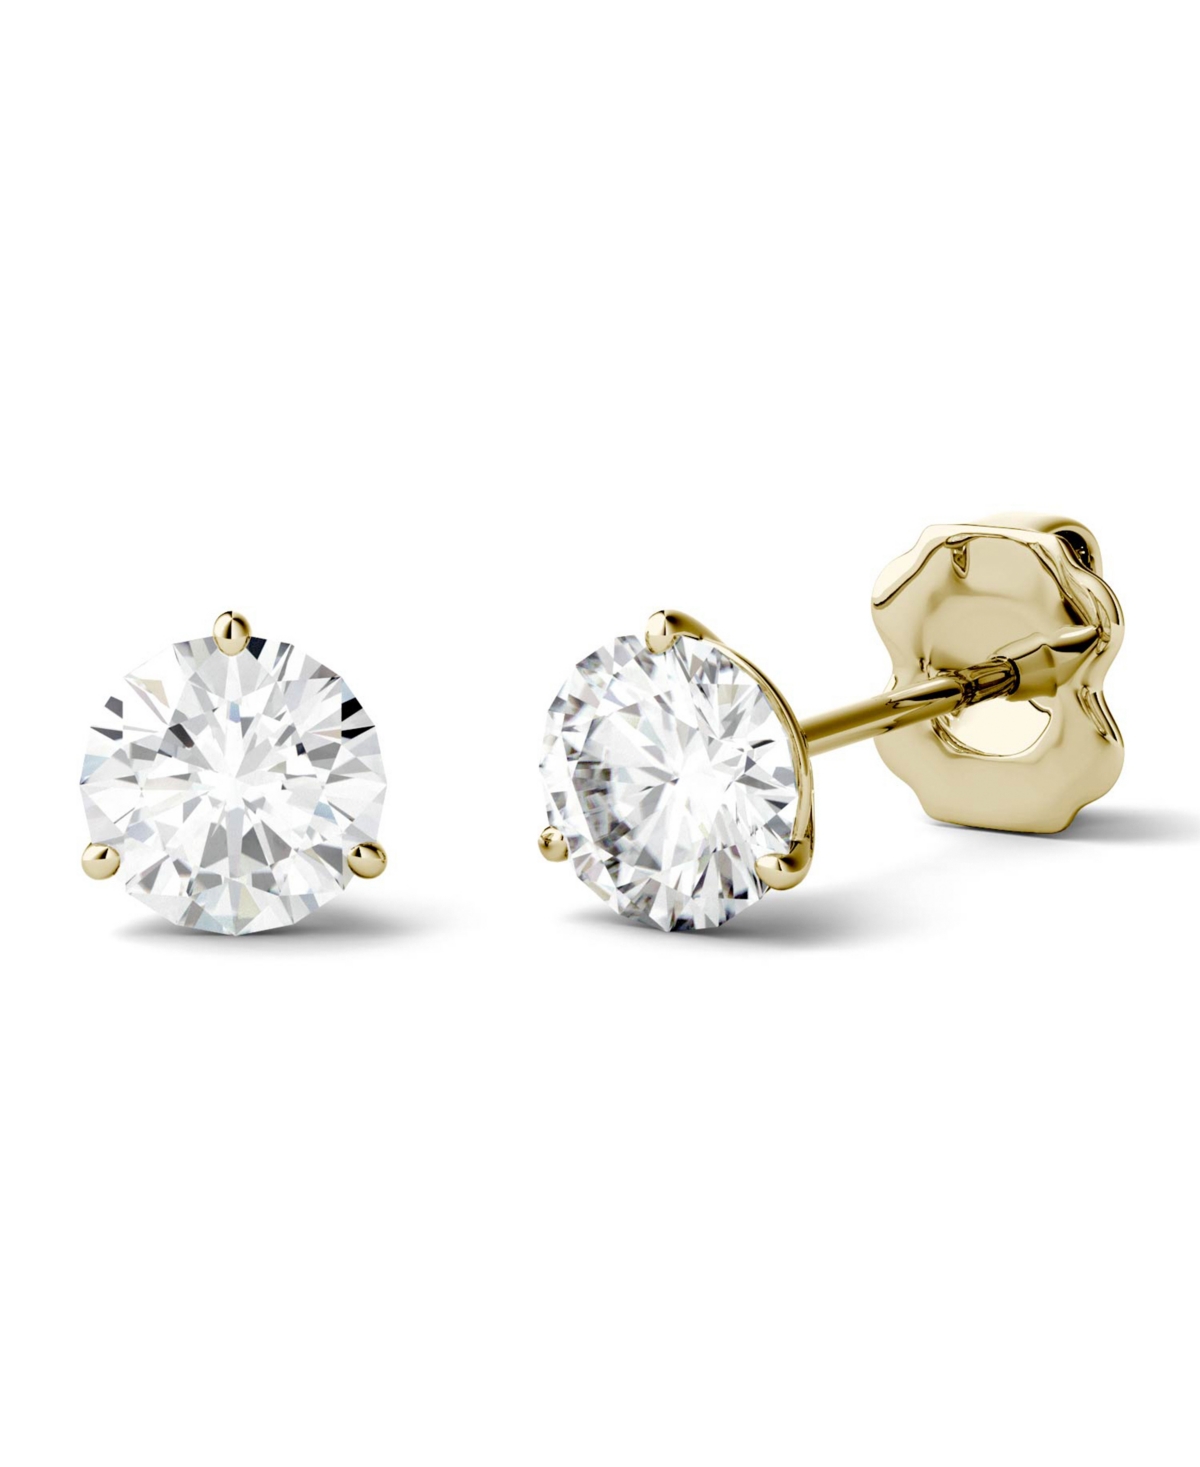 Moissanite Martini Stud Earrings (1 ct. t.w. Diamond Equivalent) in 14k white or yellow gold - Gold